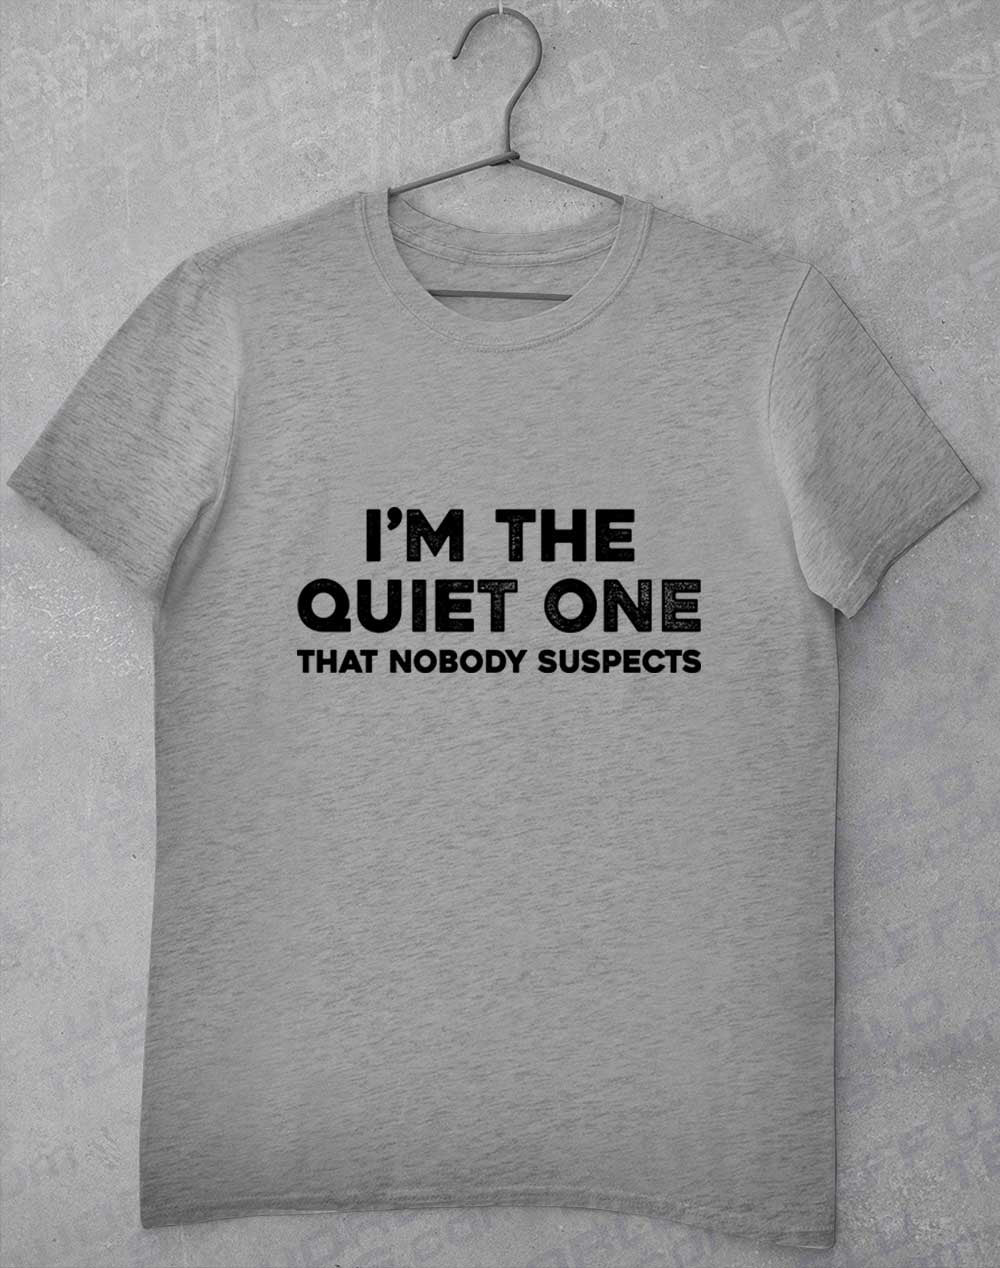 Sport Grey - I'm the Quiet One T-Shirt